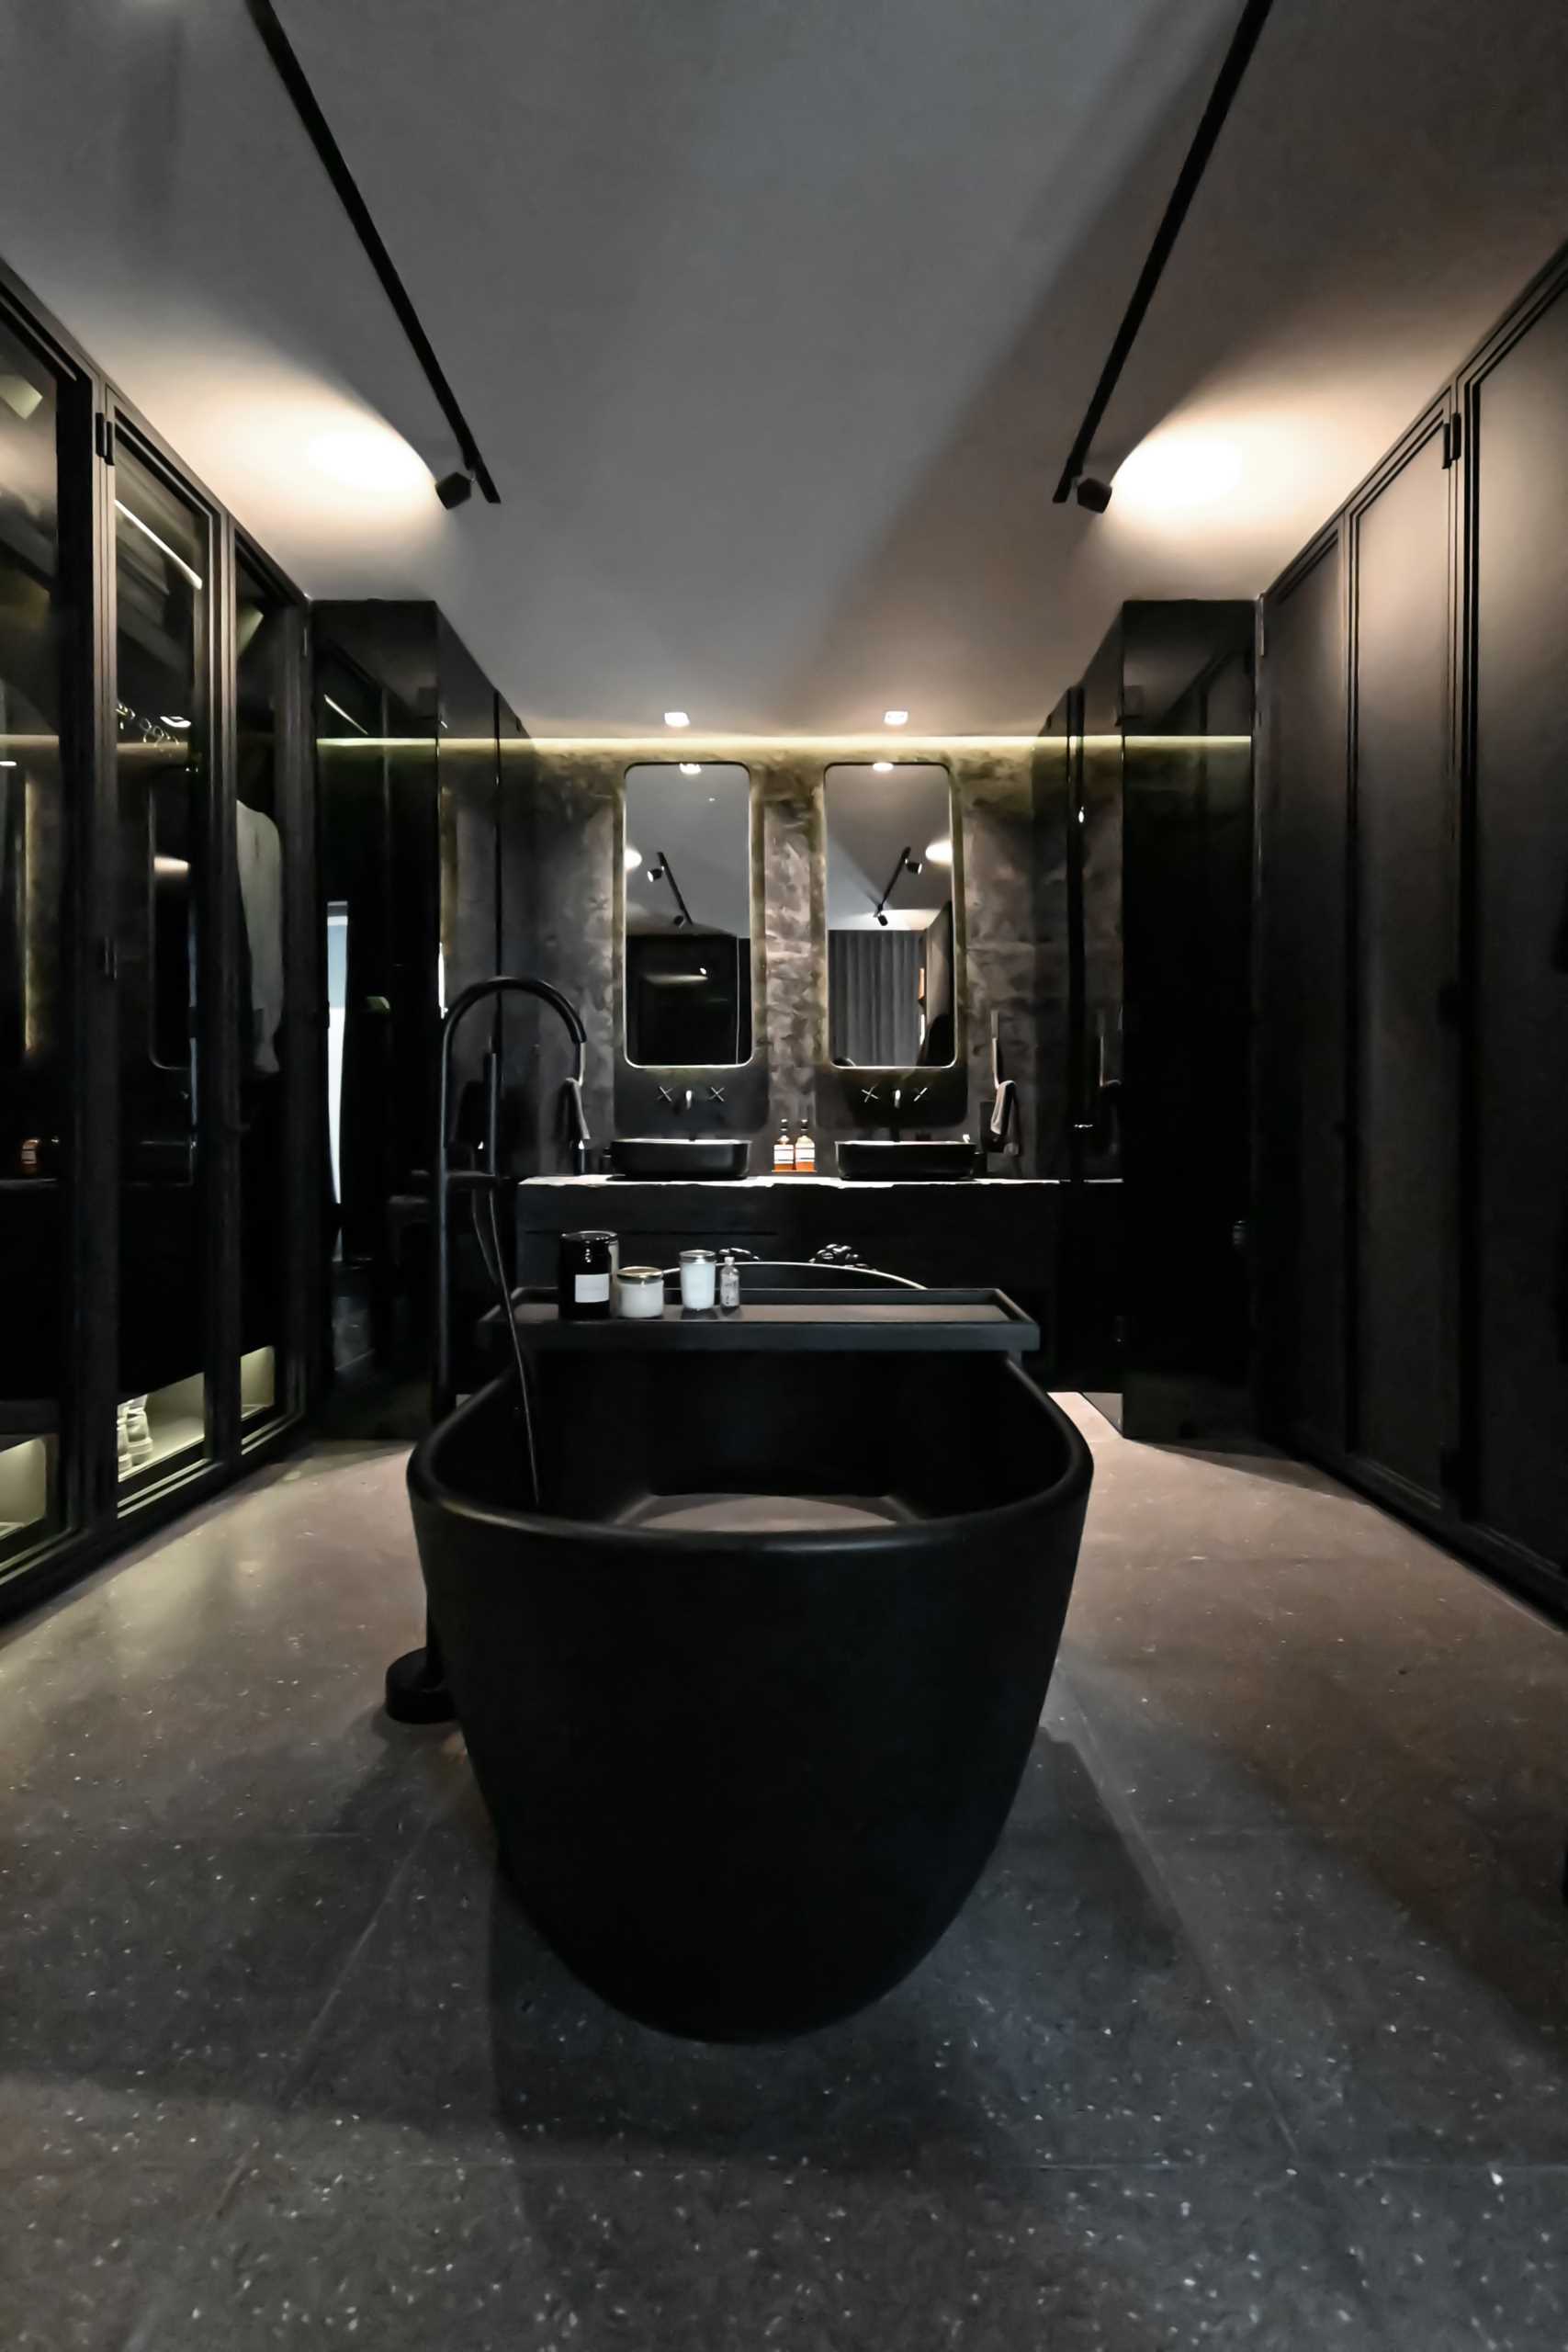 A modern black bathroom includes a freestanding black bathtub in the center of the room, a wall of gl،-fronted closets, and a double vanity. The toilet and s،wer are located behind gl، boxes on either side of the vanity.